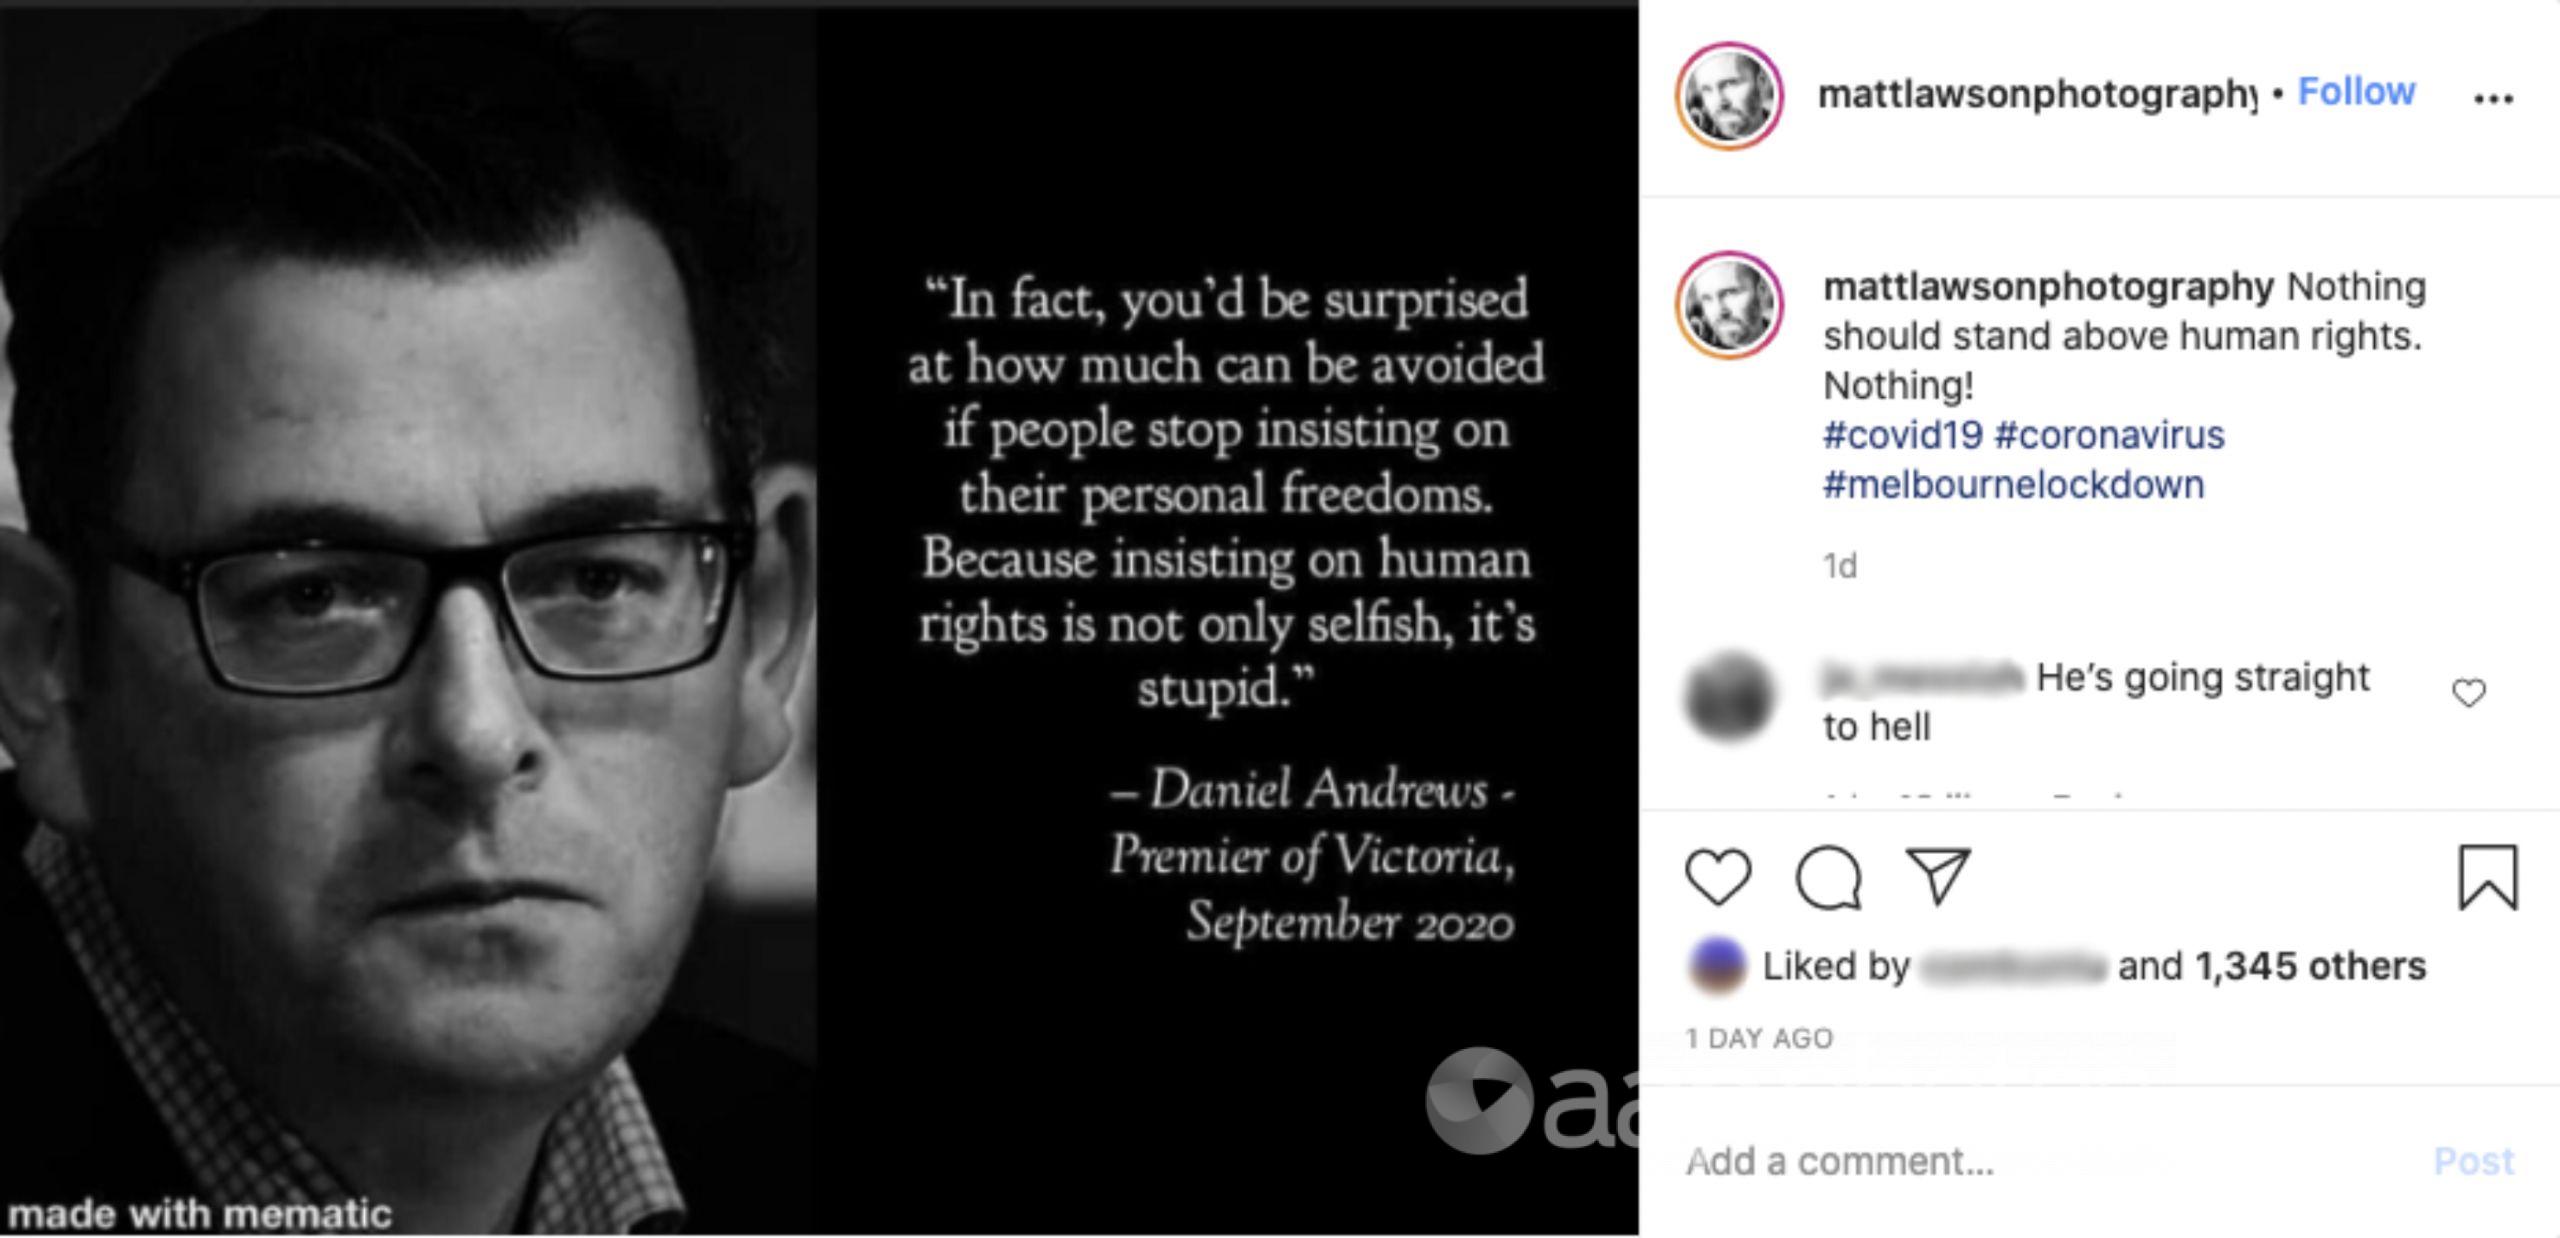 An Instagram post with a quote wrongly attributed to Daniel Andrews